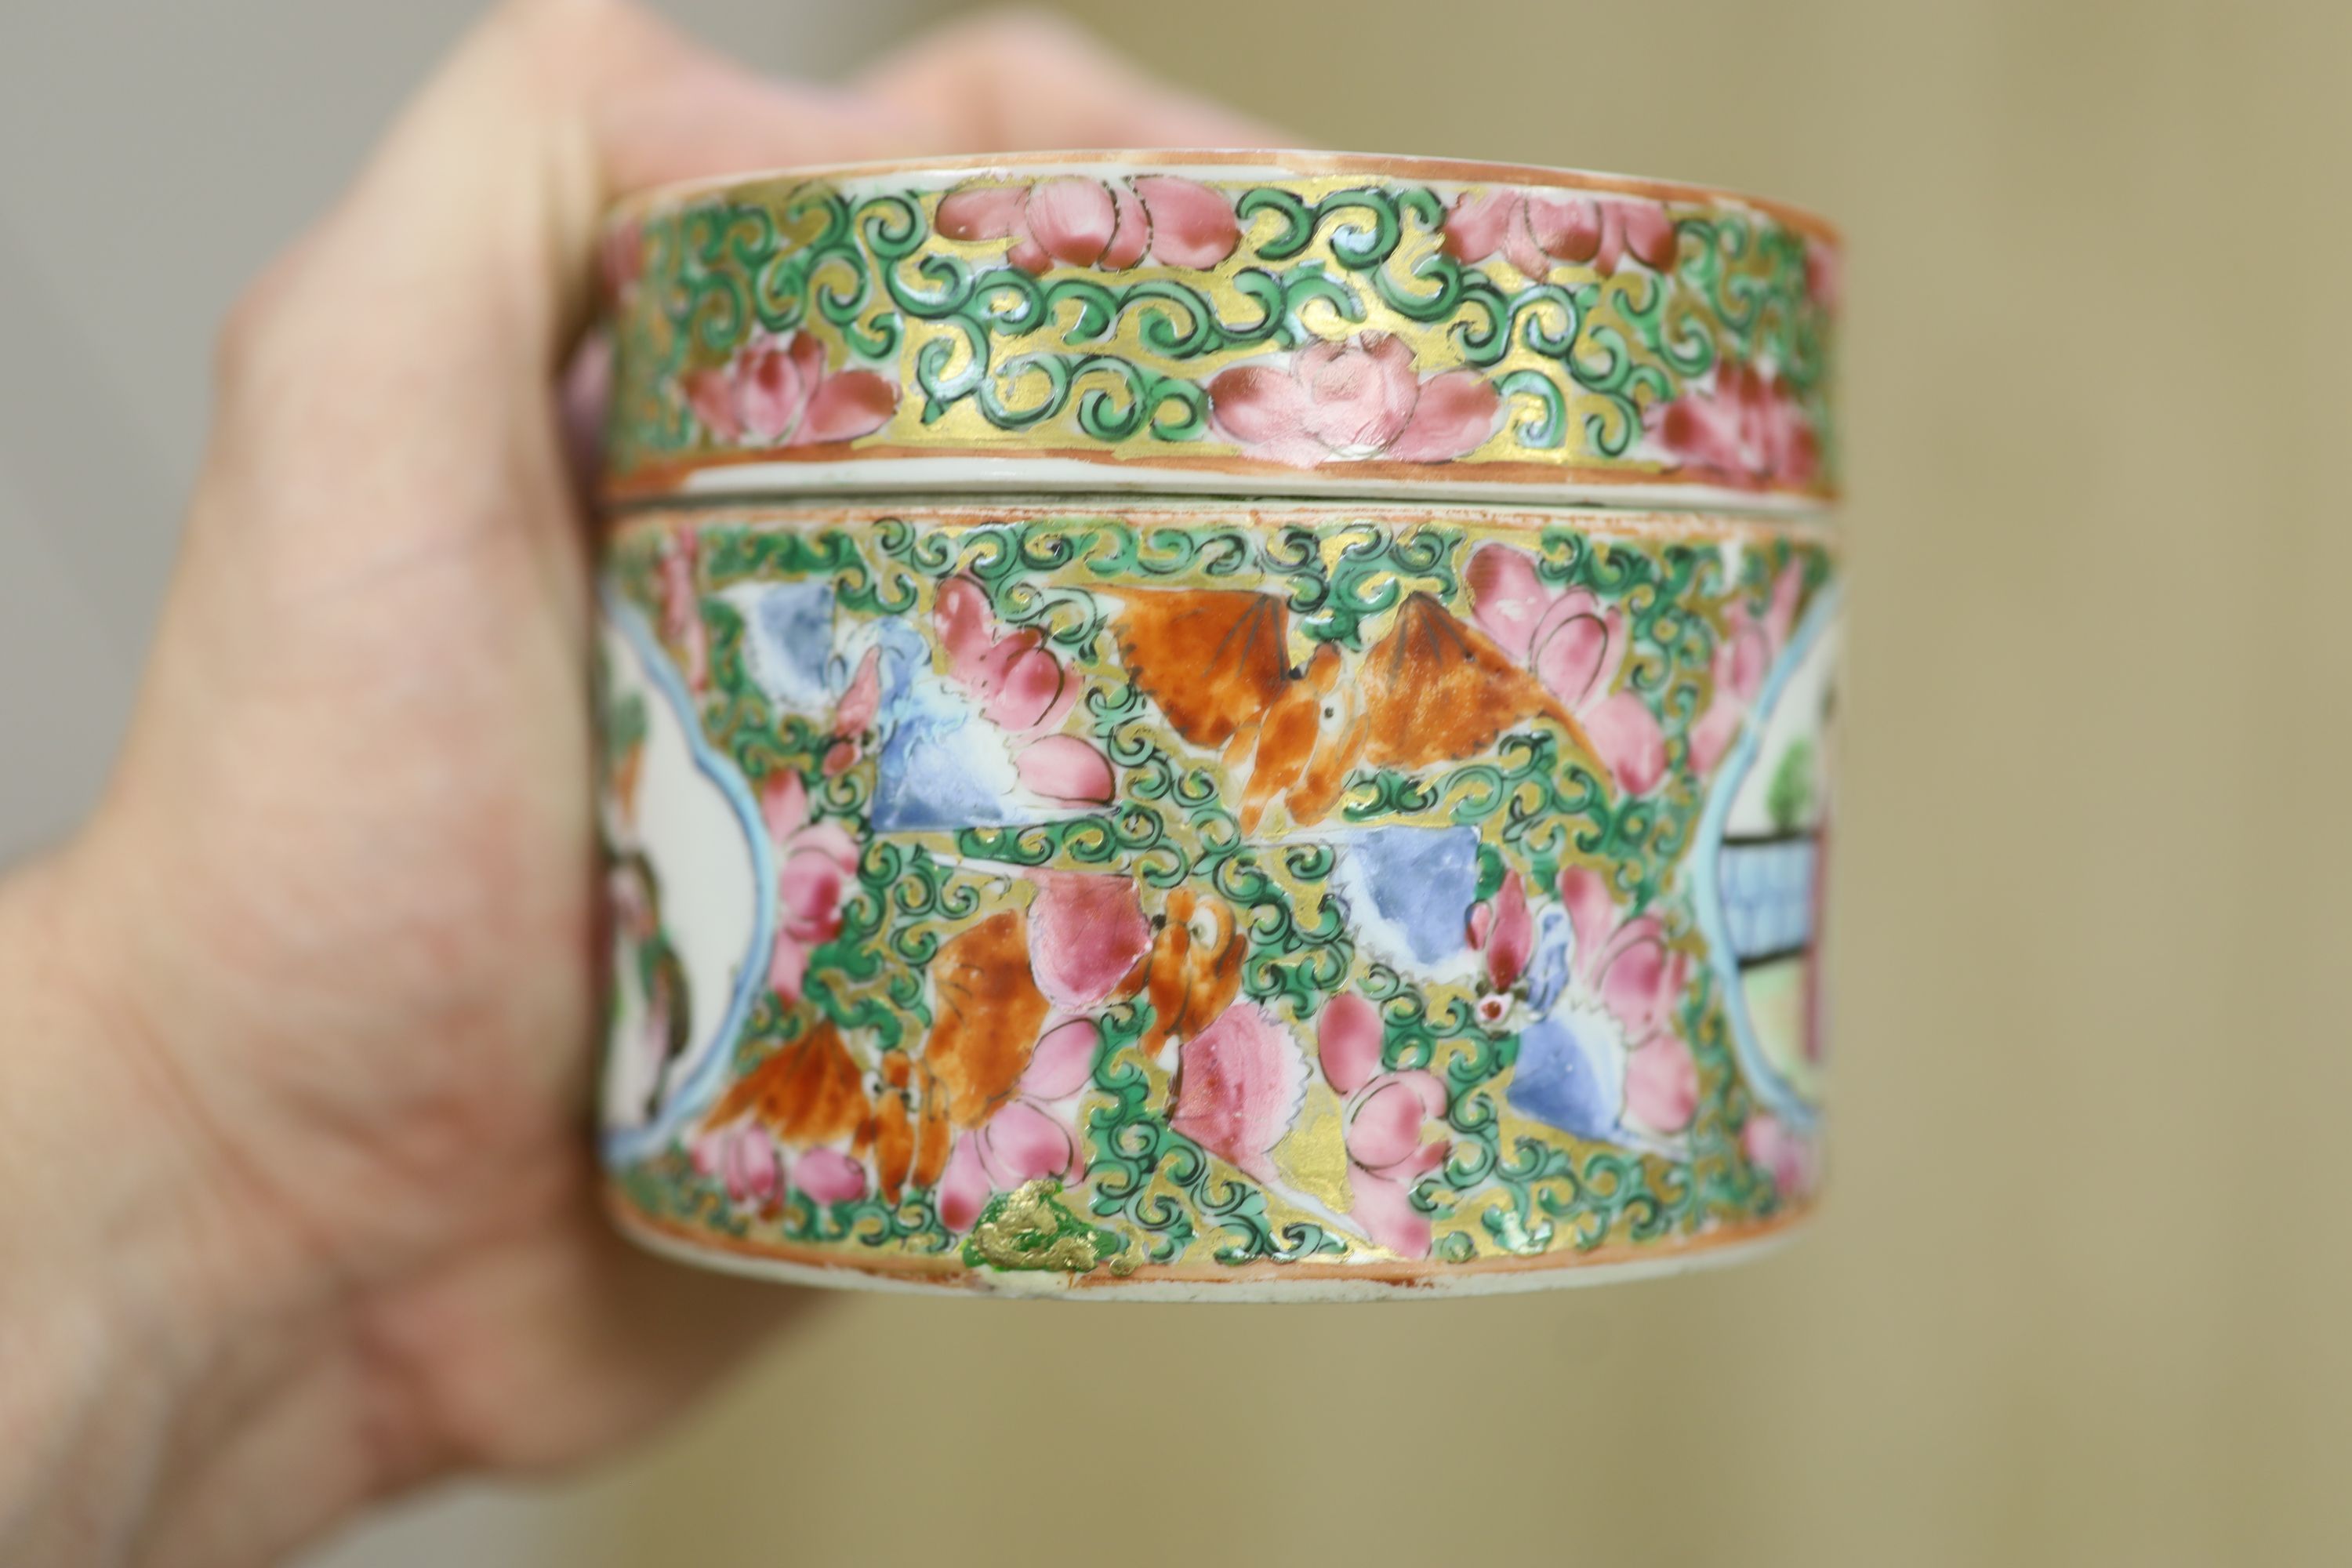 A Chinese famille rose box and cover, two vases, a sugar bowl and cover and a saucer, late 19th/early 20th century, tallest 19cm